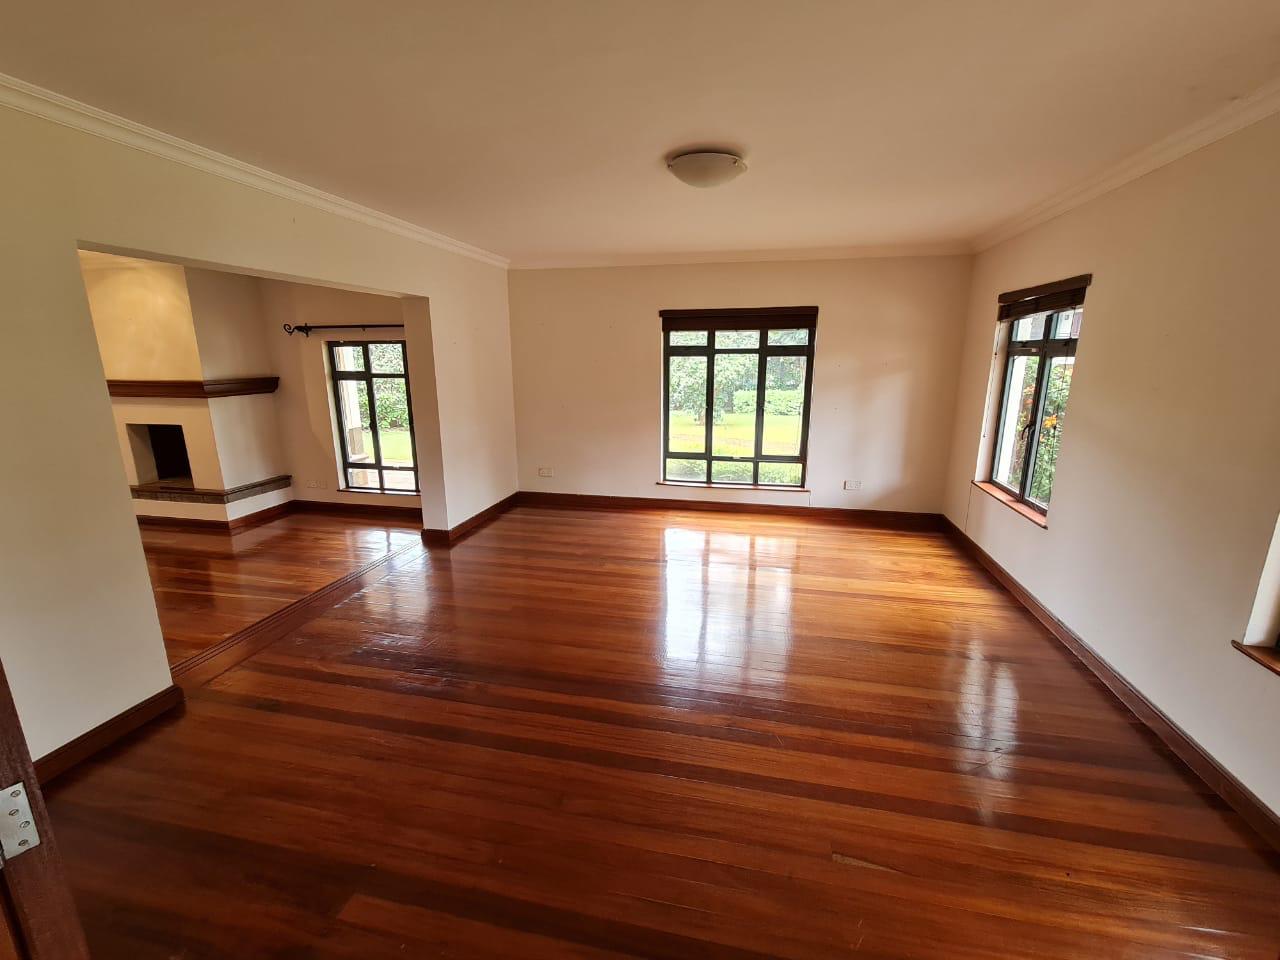 Lovely 4 bedroom Townhouse plus dsq for rent at Ksh330k in Westlands, ensuite, family room, office, detached dsq for 2, very well maintained and more amenities5